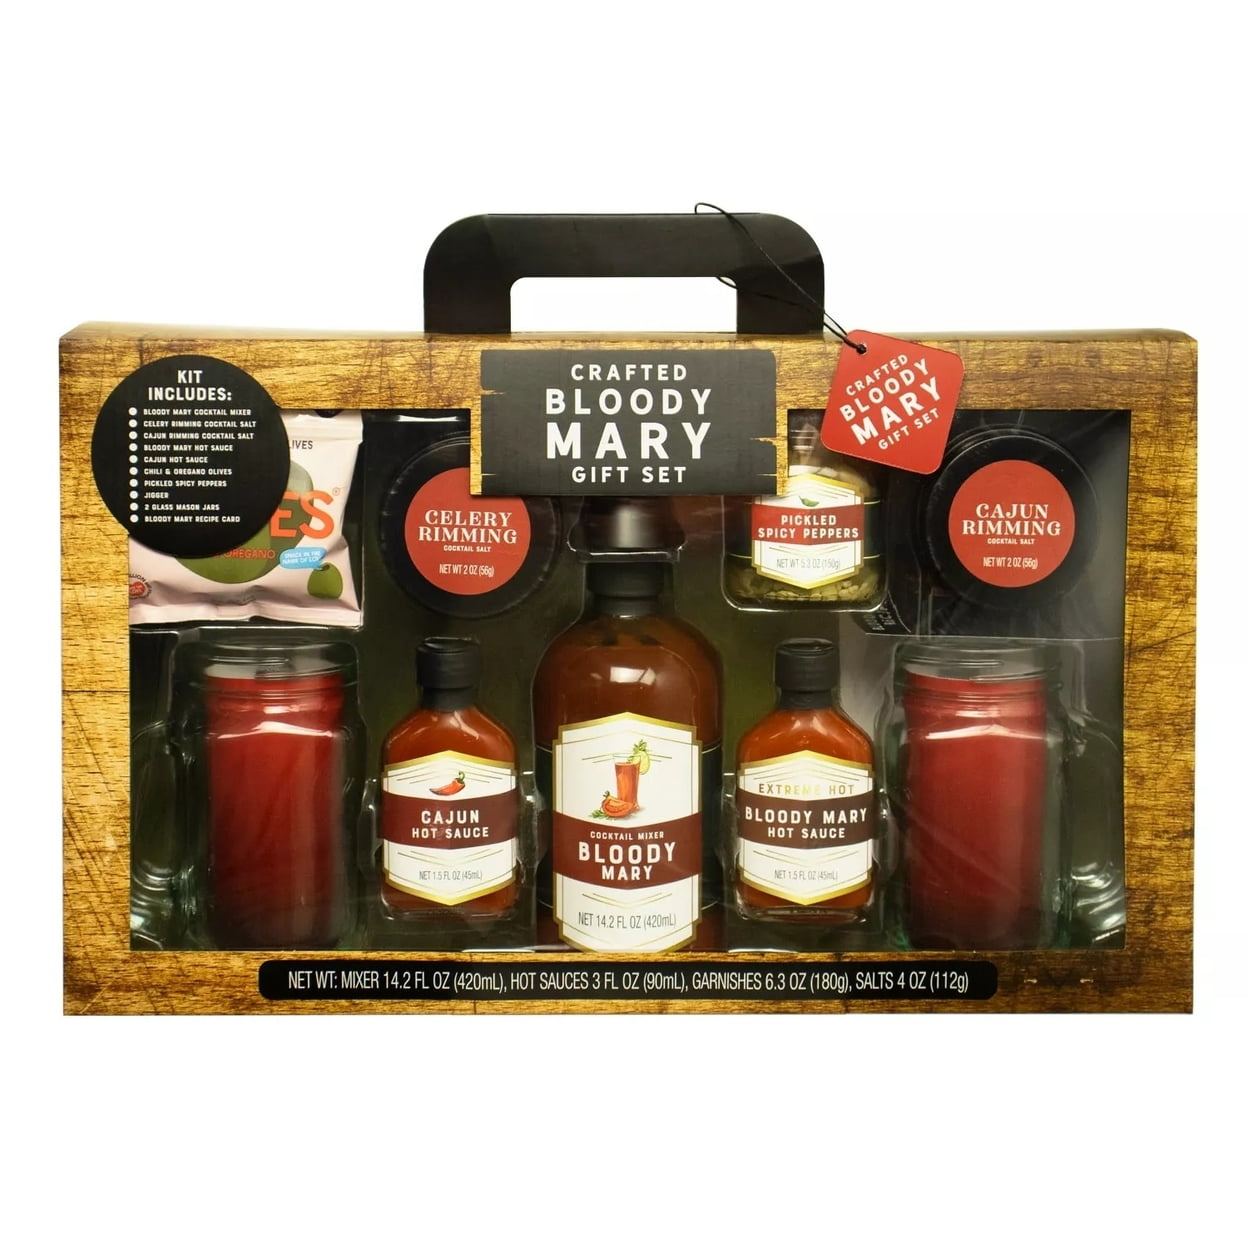 Thoughtfully Gourmet, Master Hot Sauce Collection Sampler Set, Flavors  Include Garlic Herb, Apple Whiskey and More, Gift Set of 30